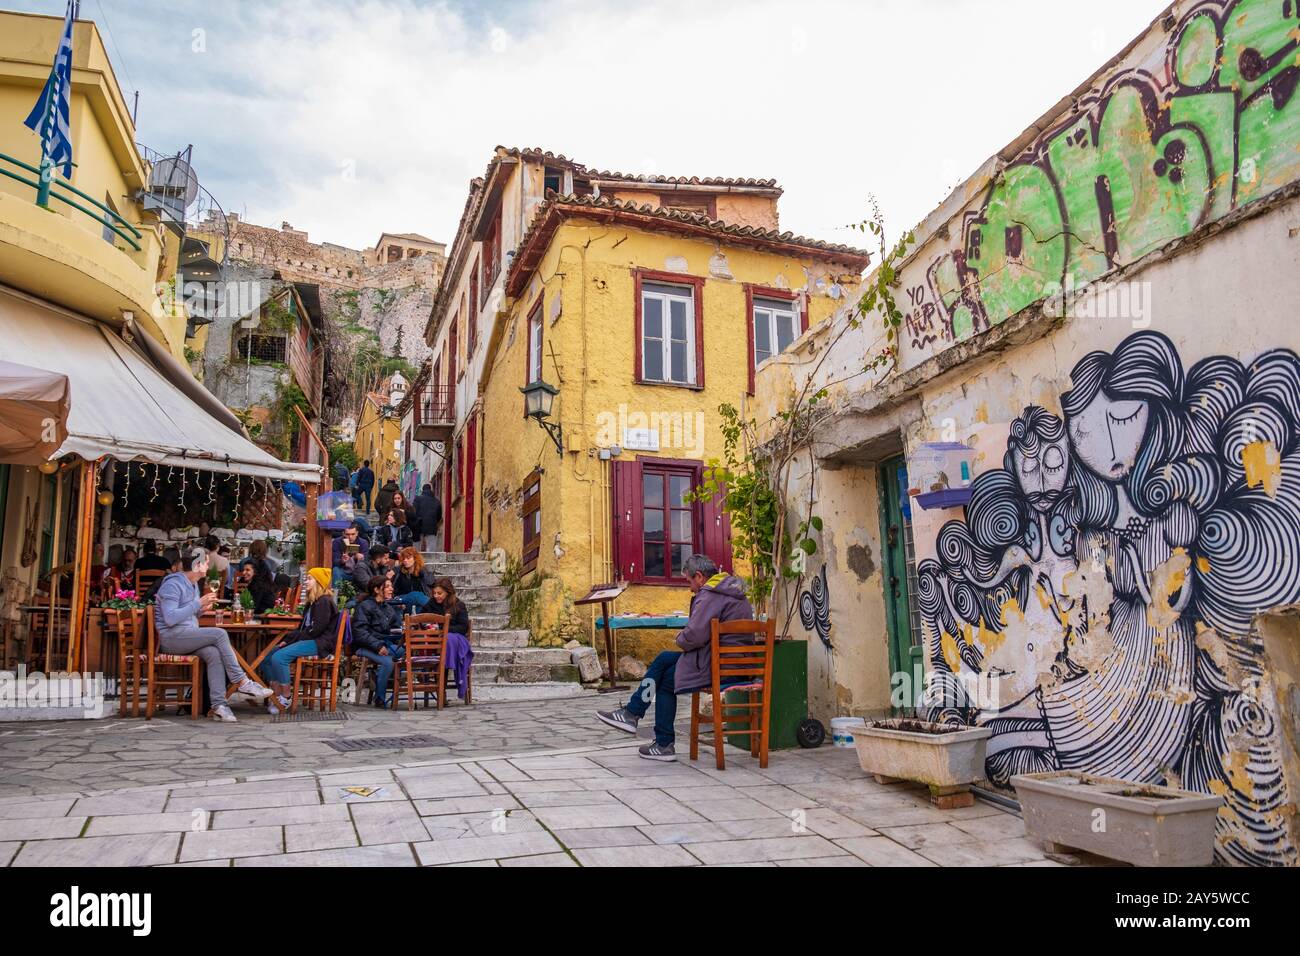 Athens, Greece - January 25, 2020: People relax in a cafe in Plaka area of Athens with the Acropolis in the background Stock Photo